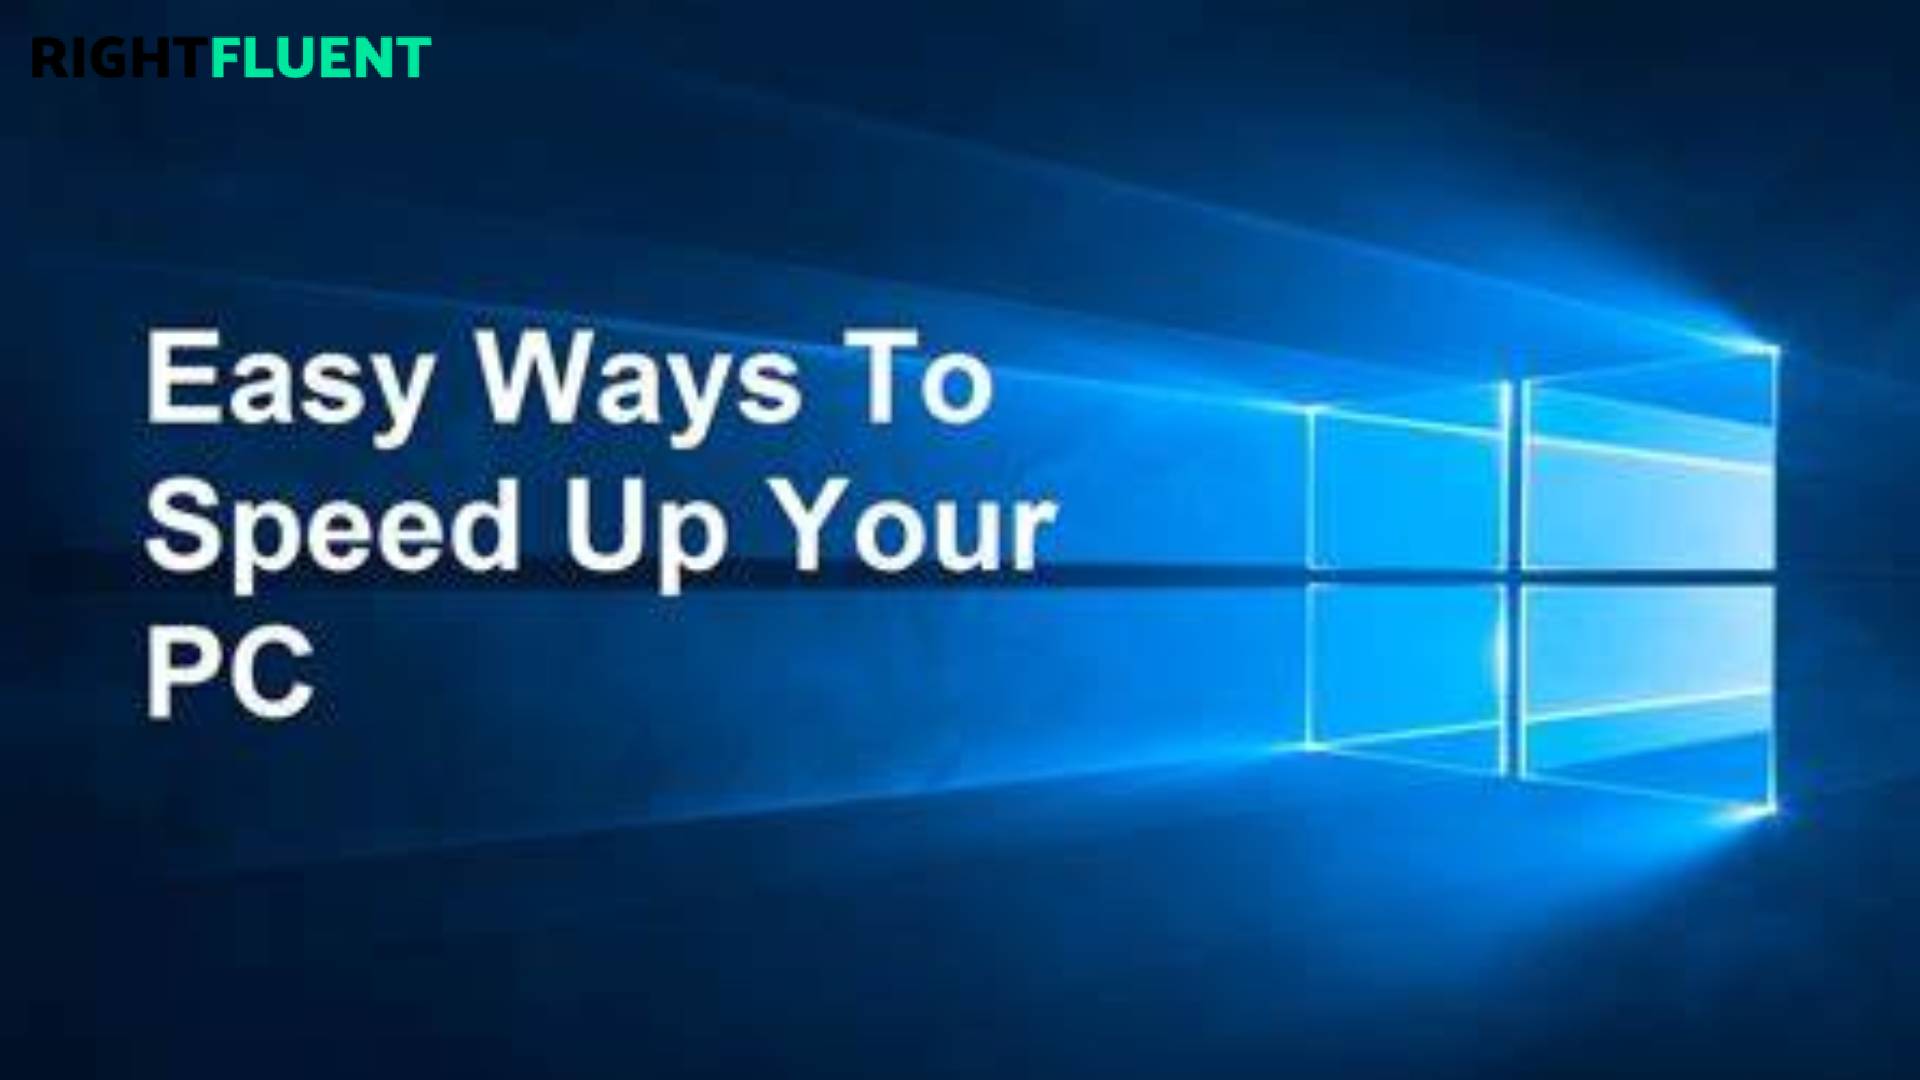 Top 5 tips to Speed up Your Computer